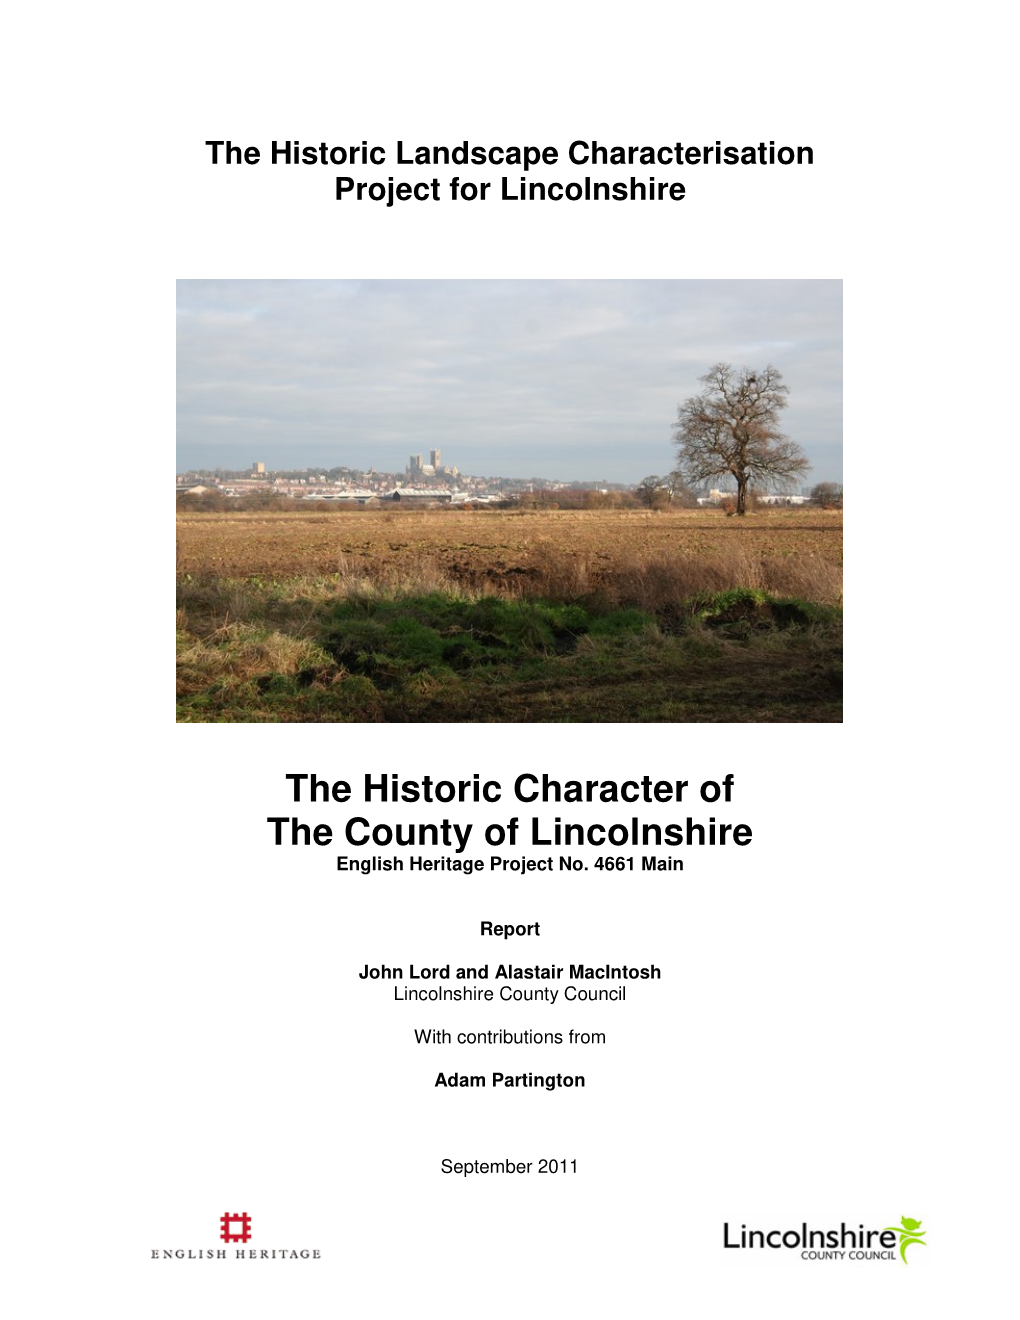 The Historic Character of Lincolnshire